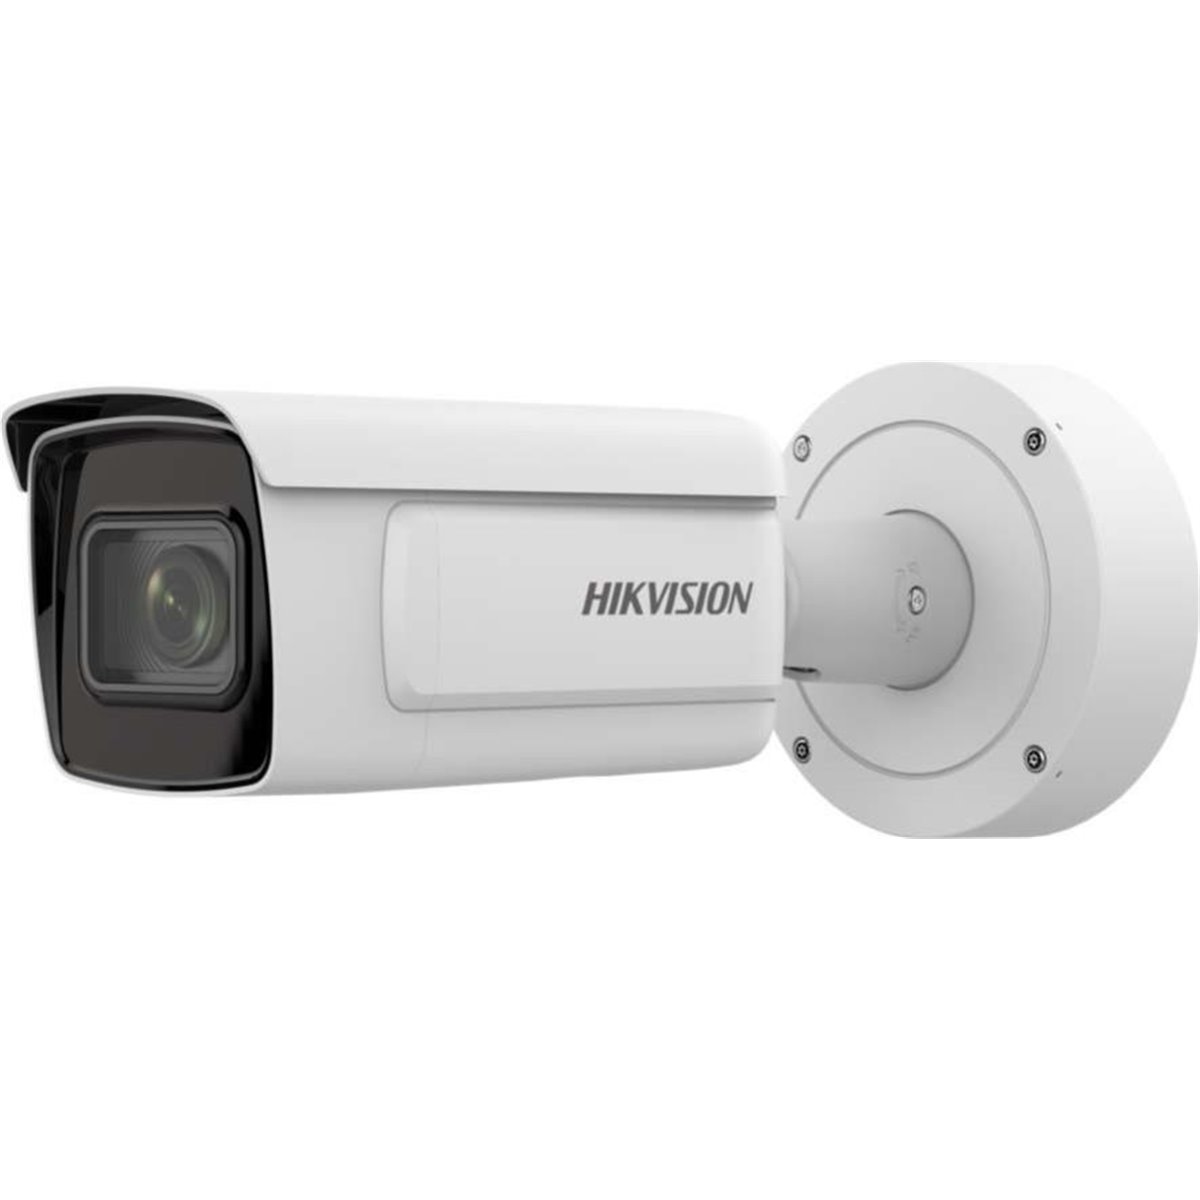 Hikvision IDS-2CD7A46G0-IZHSY(2.8-12MM)( C)